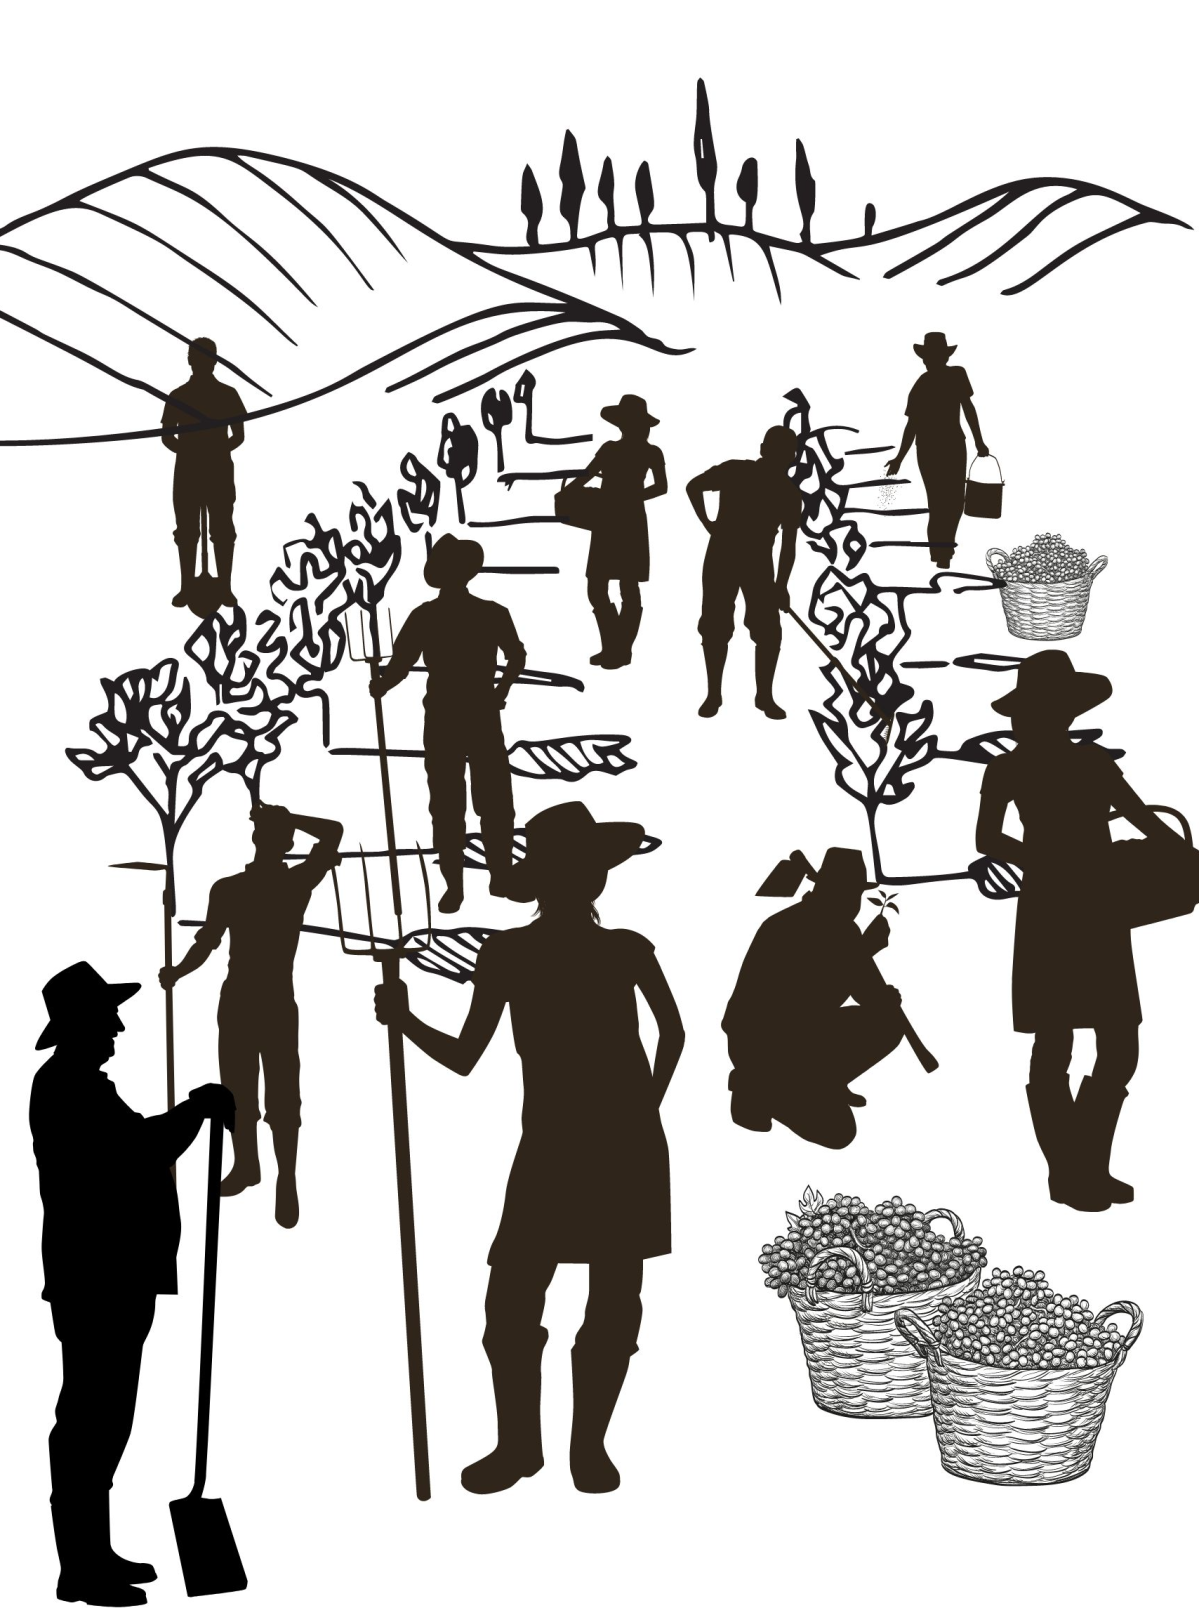 Parable of the Laborers in the Vineyard